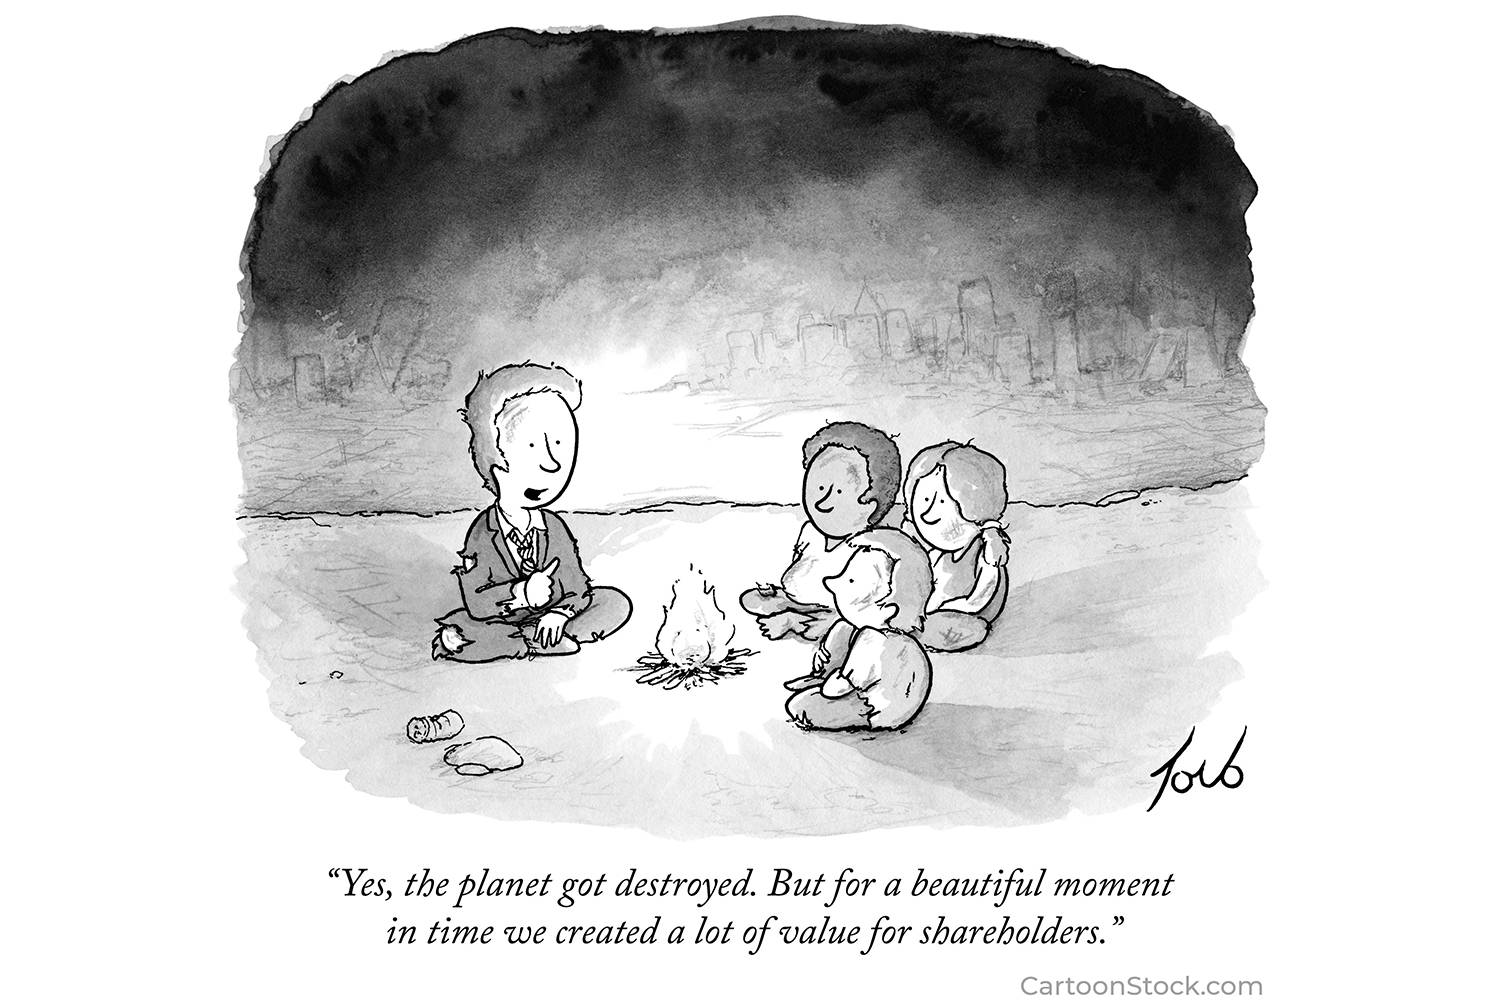 A Tom Toro climate change cartoon originally published in "The New Yorker" in 2012 showing a man in a suit with three kids around a bonfire in a blighted landscape. The caption reads, "Yes, the planet got destroyed. But for a beautiful moment in time we created a lot of value for shareholders."